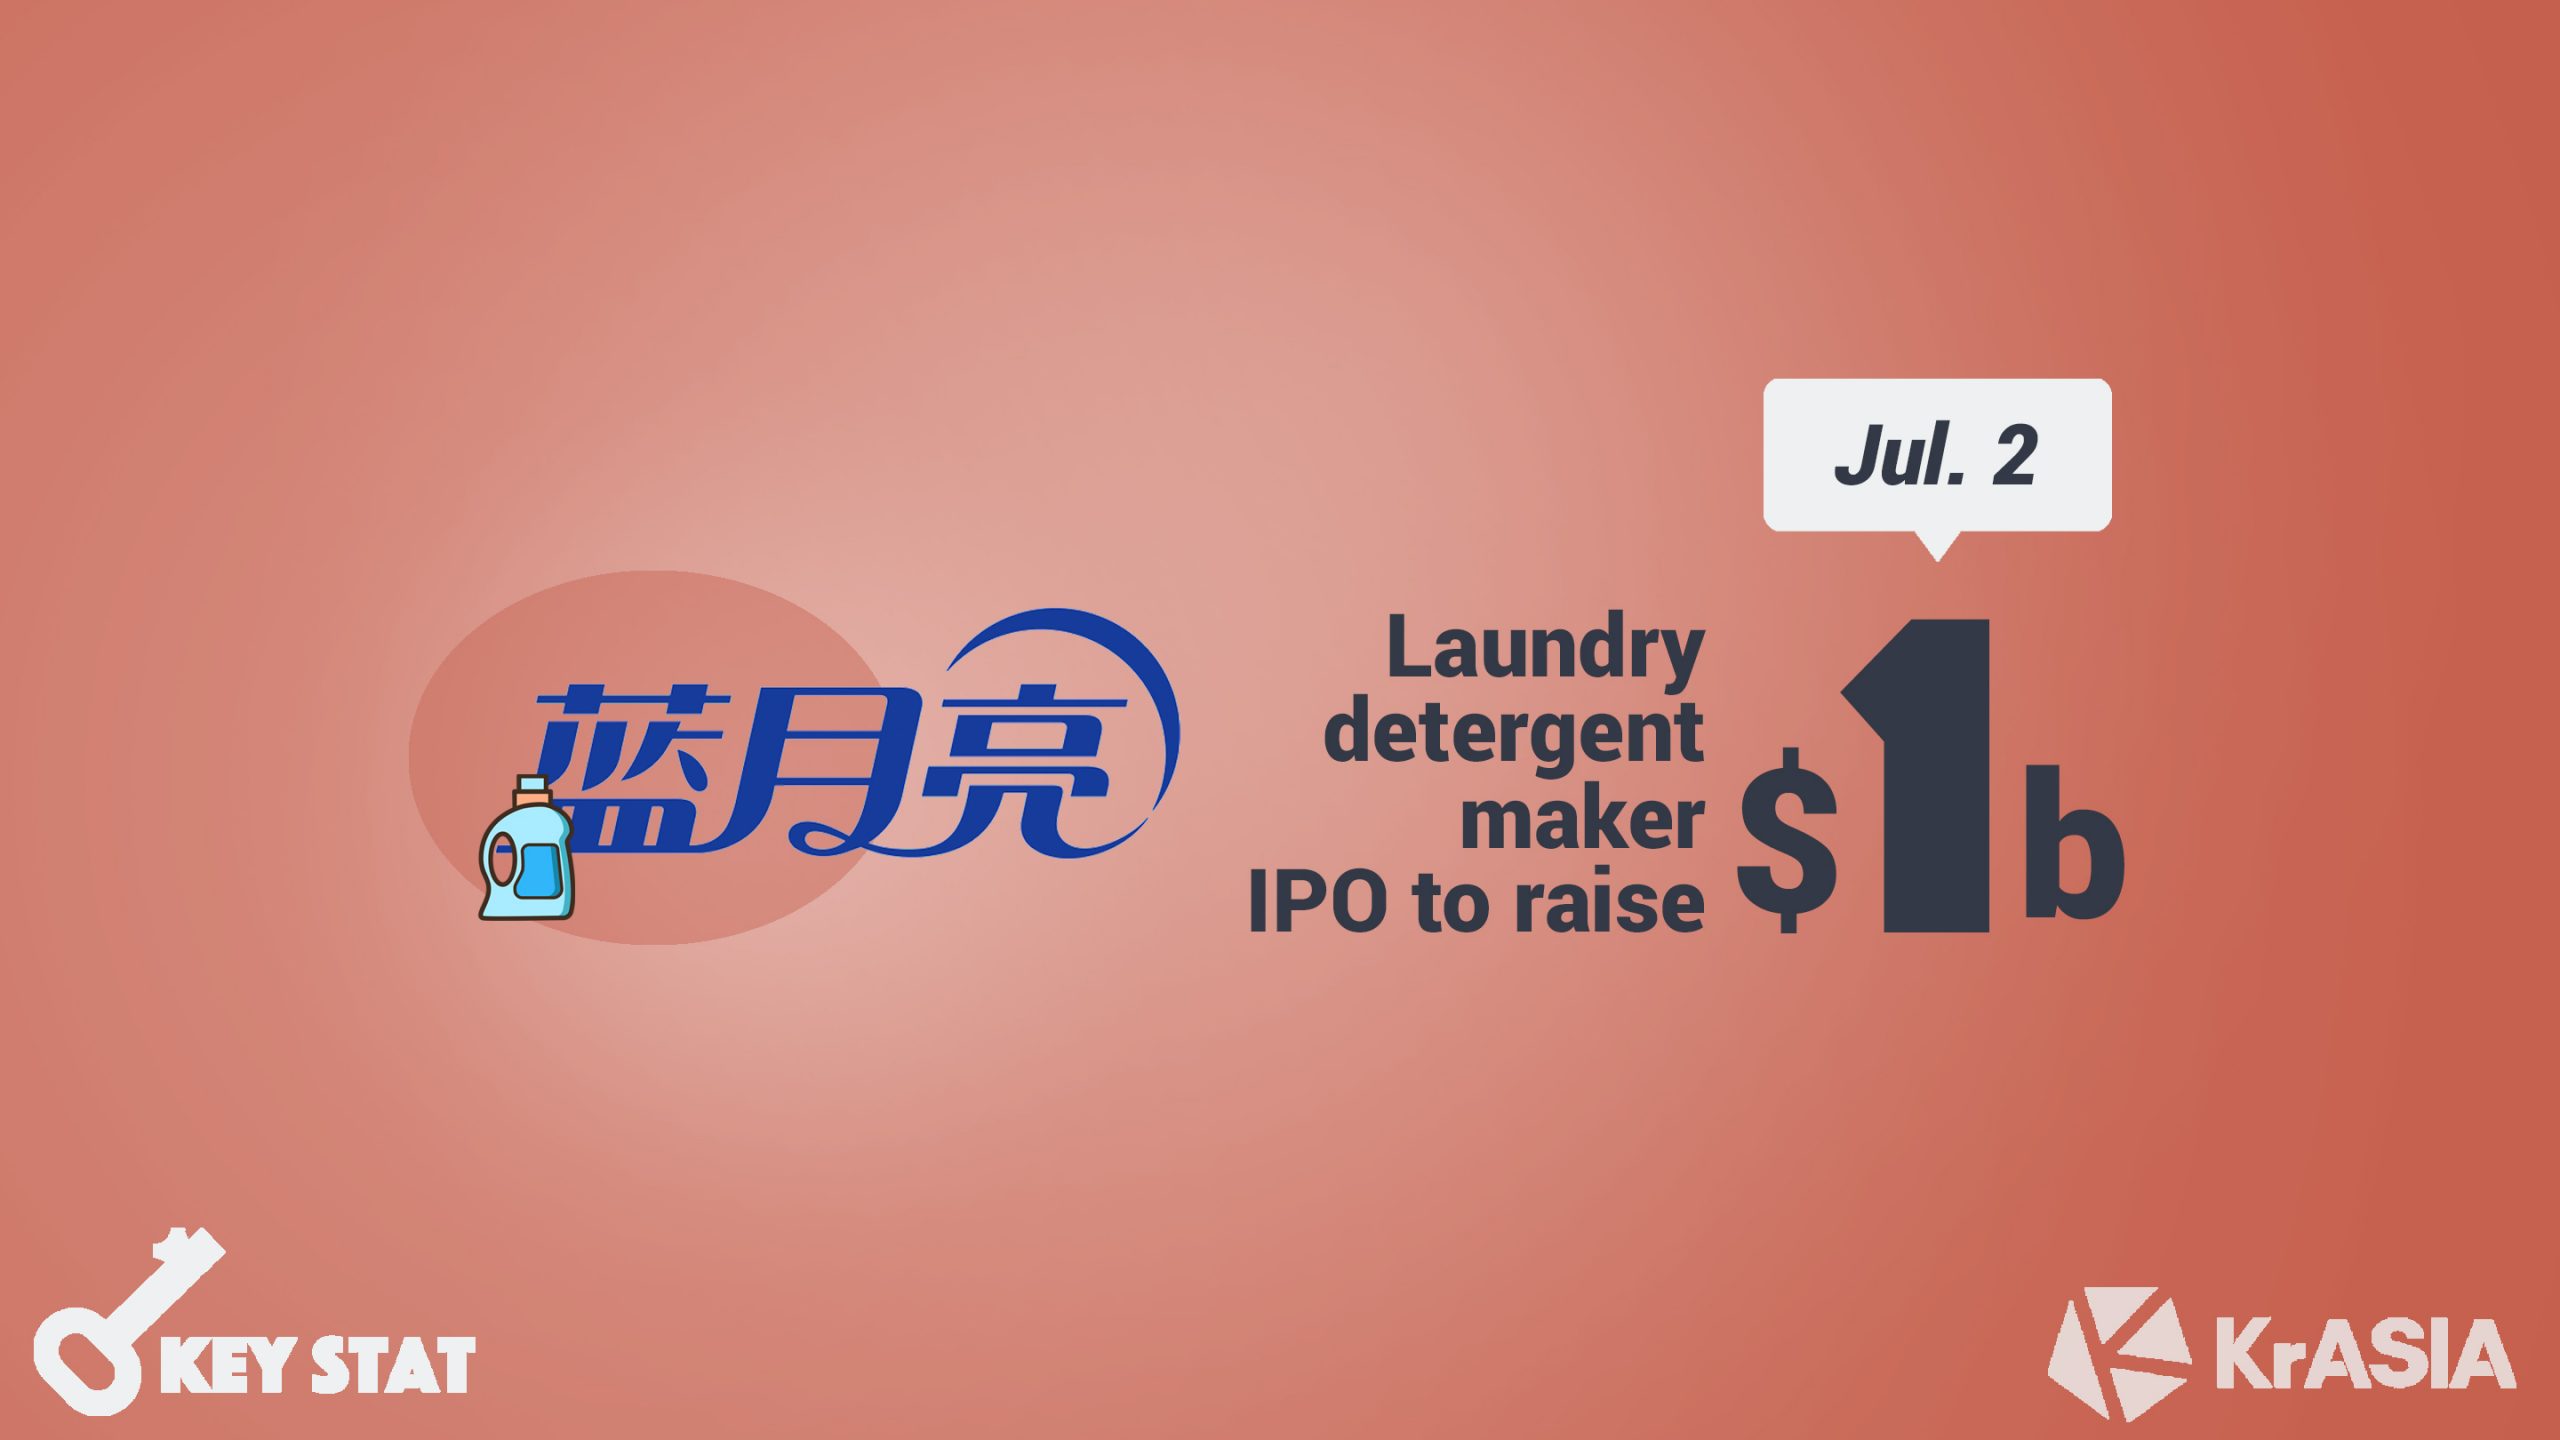 KEY STAT | The detergent maker which beat P&G and Unilever in China files for Hong Kong IPO